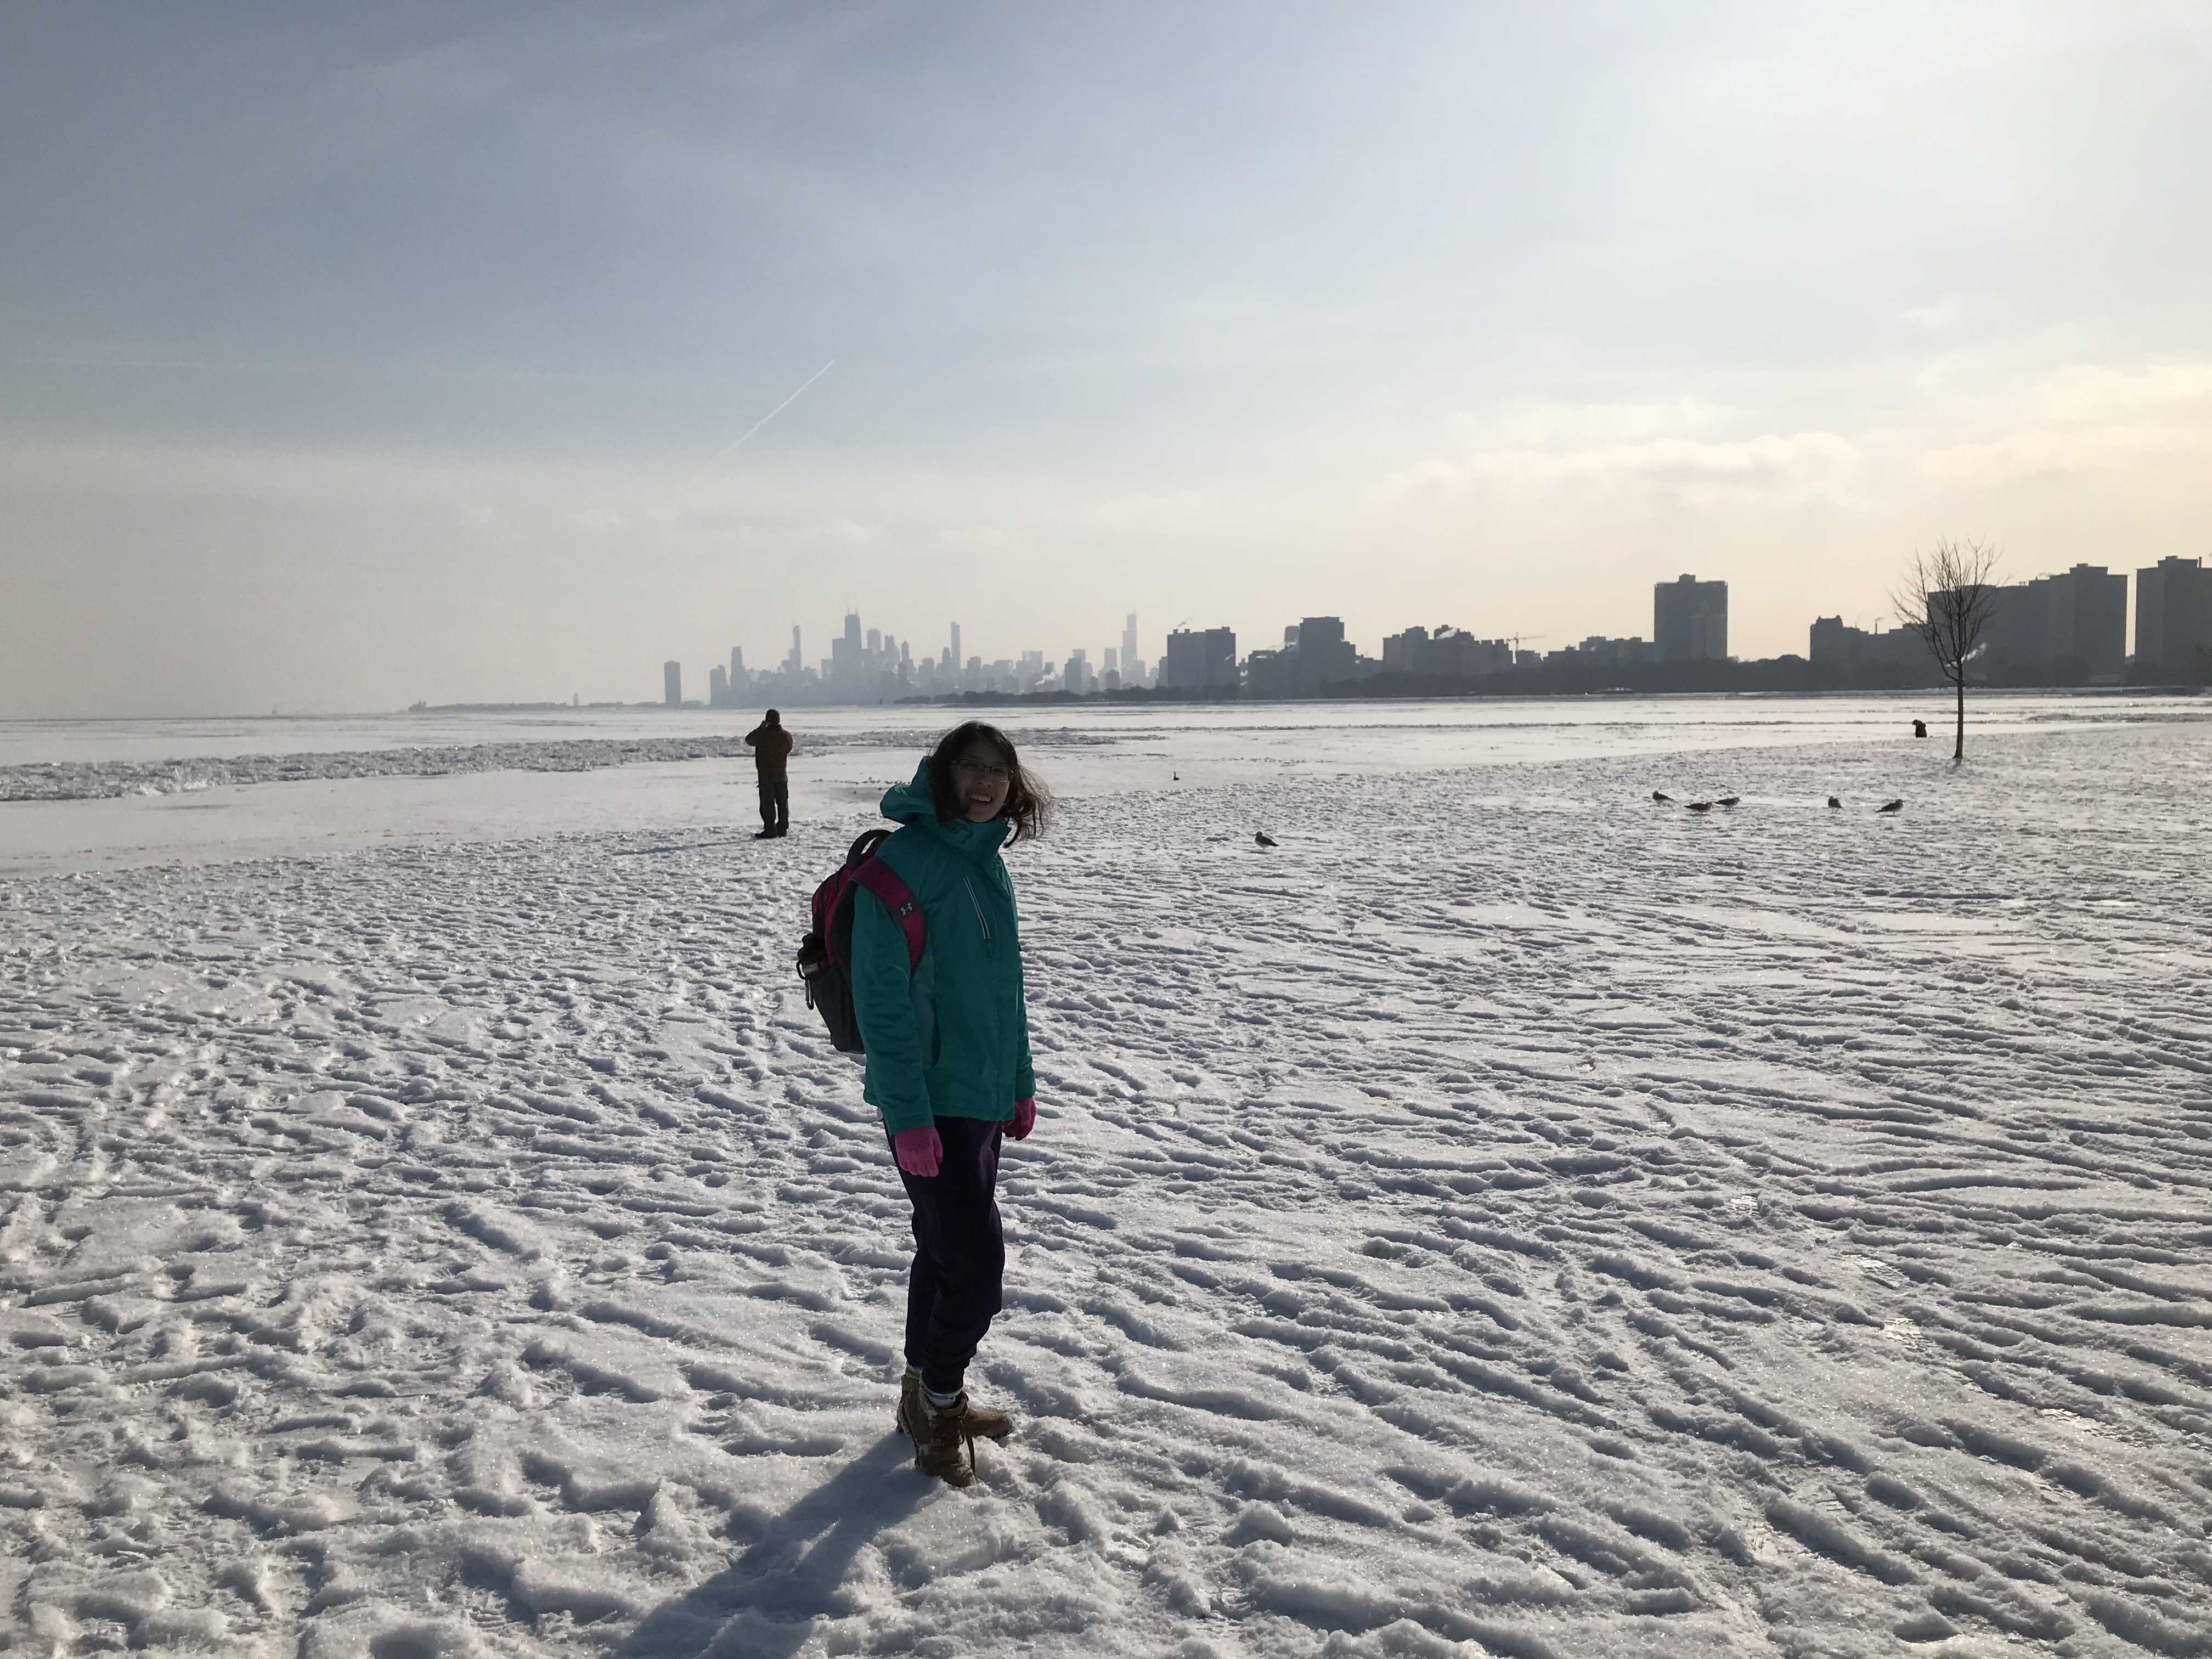 Lake Michigan and its coat of snow and ice, with the skyscraper backdrop of Chicago, Illinois, United States in the background. Meggie is wearing a thick blue jacket and brown boots. The sky is hazy white with a tint of blue.